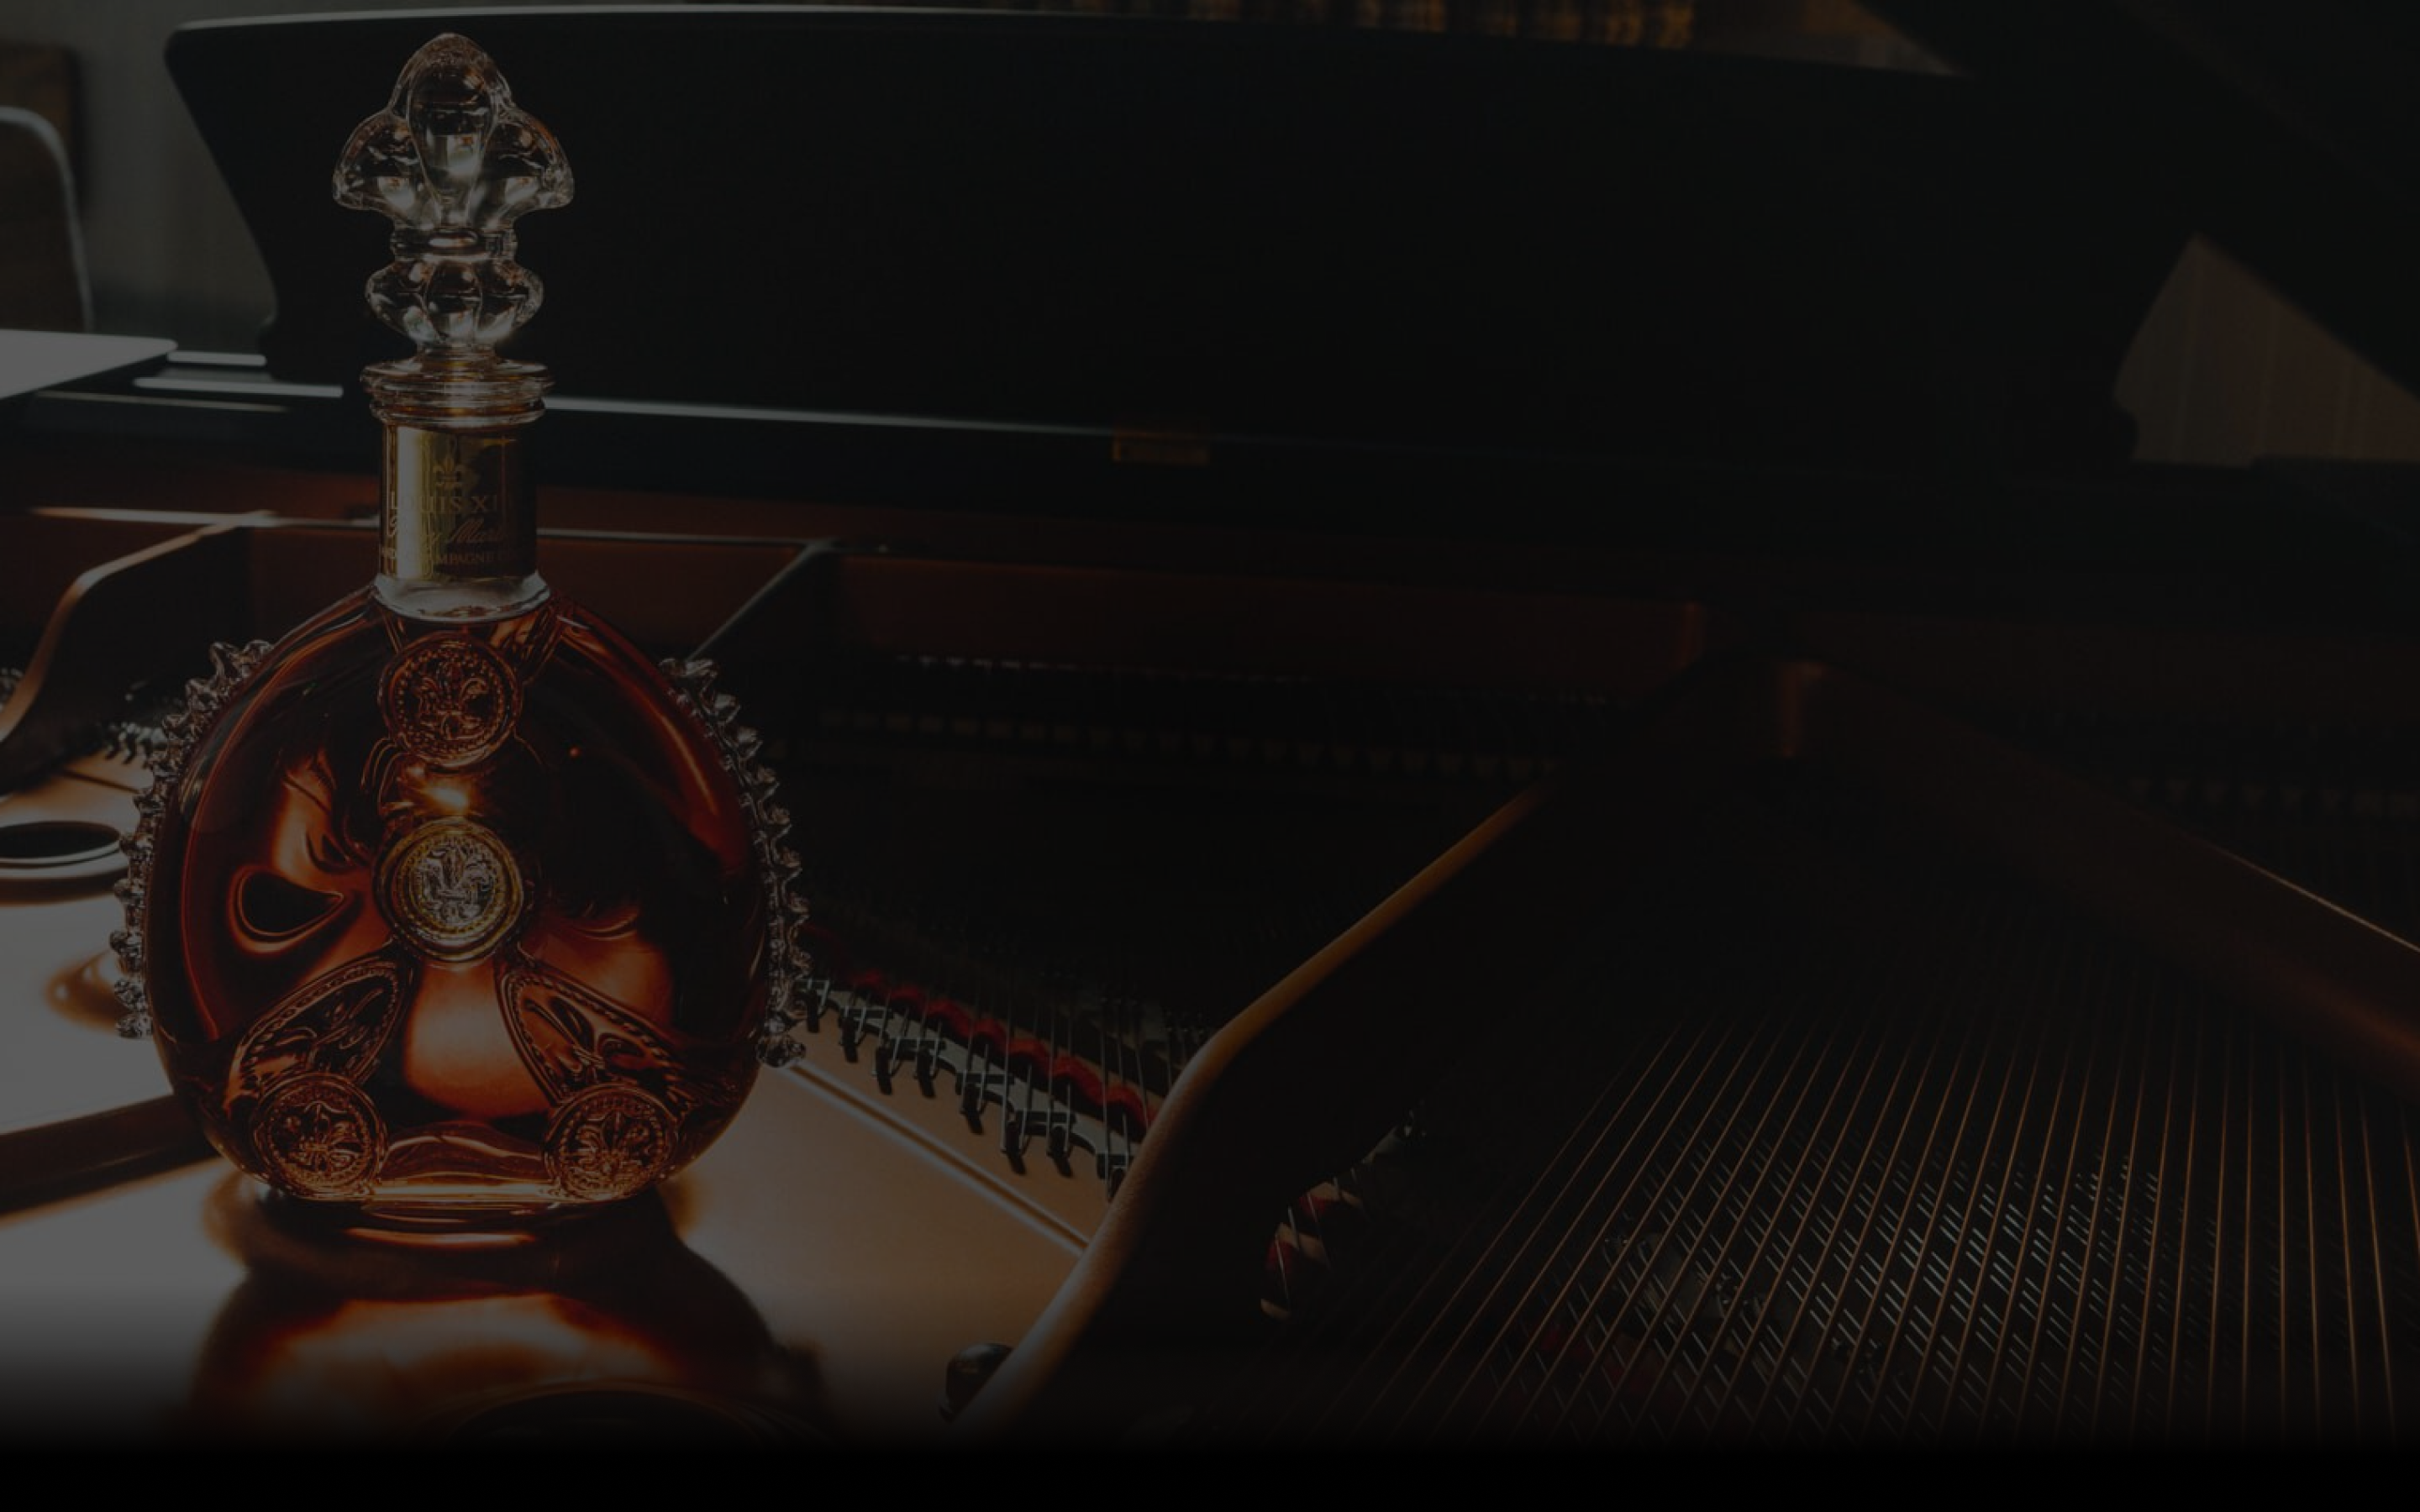 A dimmed image of LOUIS XIII decanter standing on an open piano